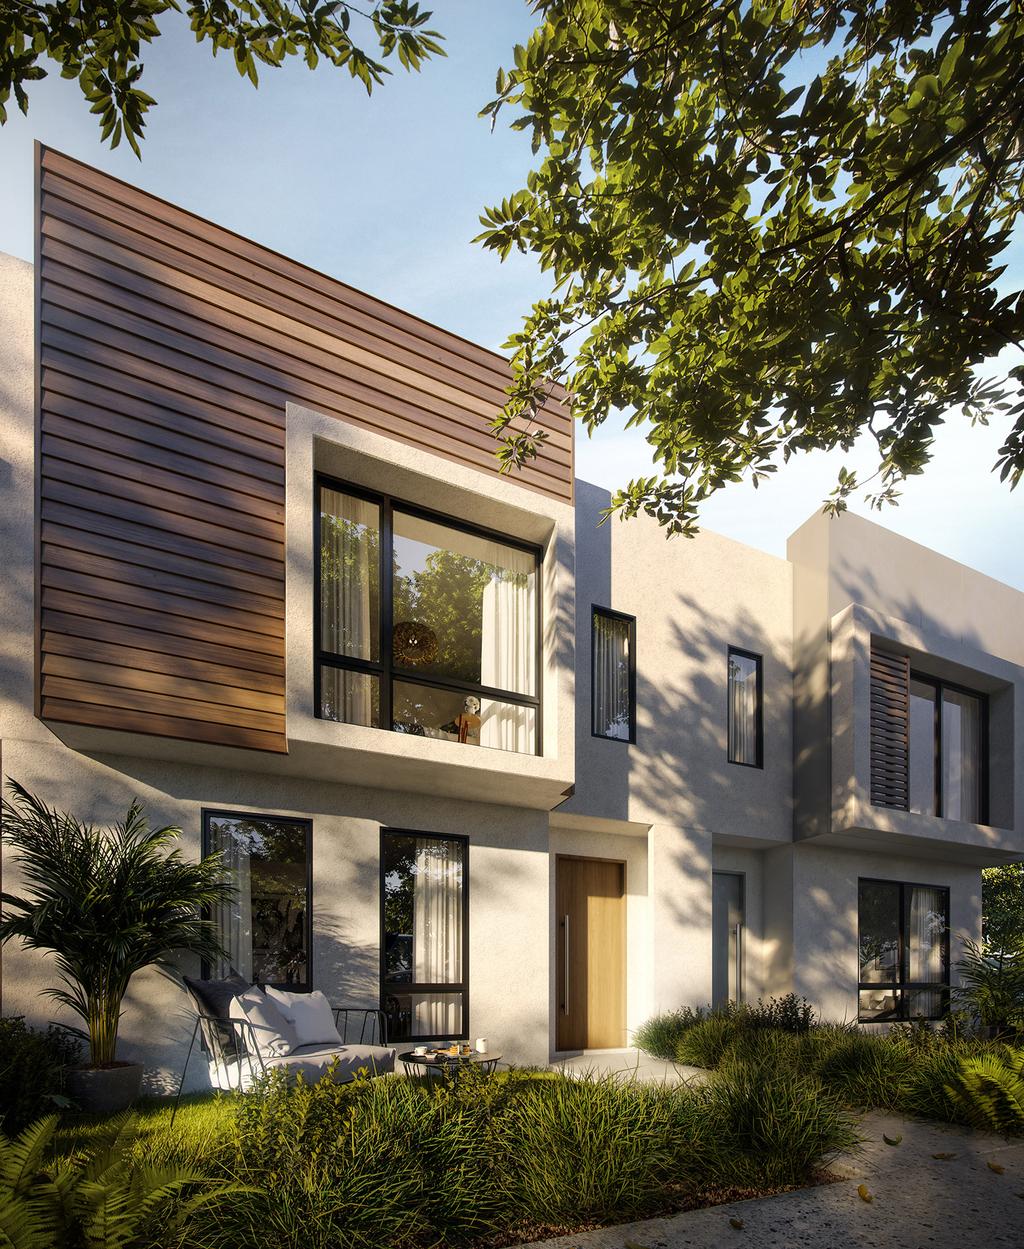 Shape Homes and ID_Land are proud to present a collection of boutique townhomes designed by award winning architects MPS.